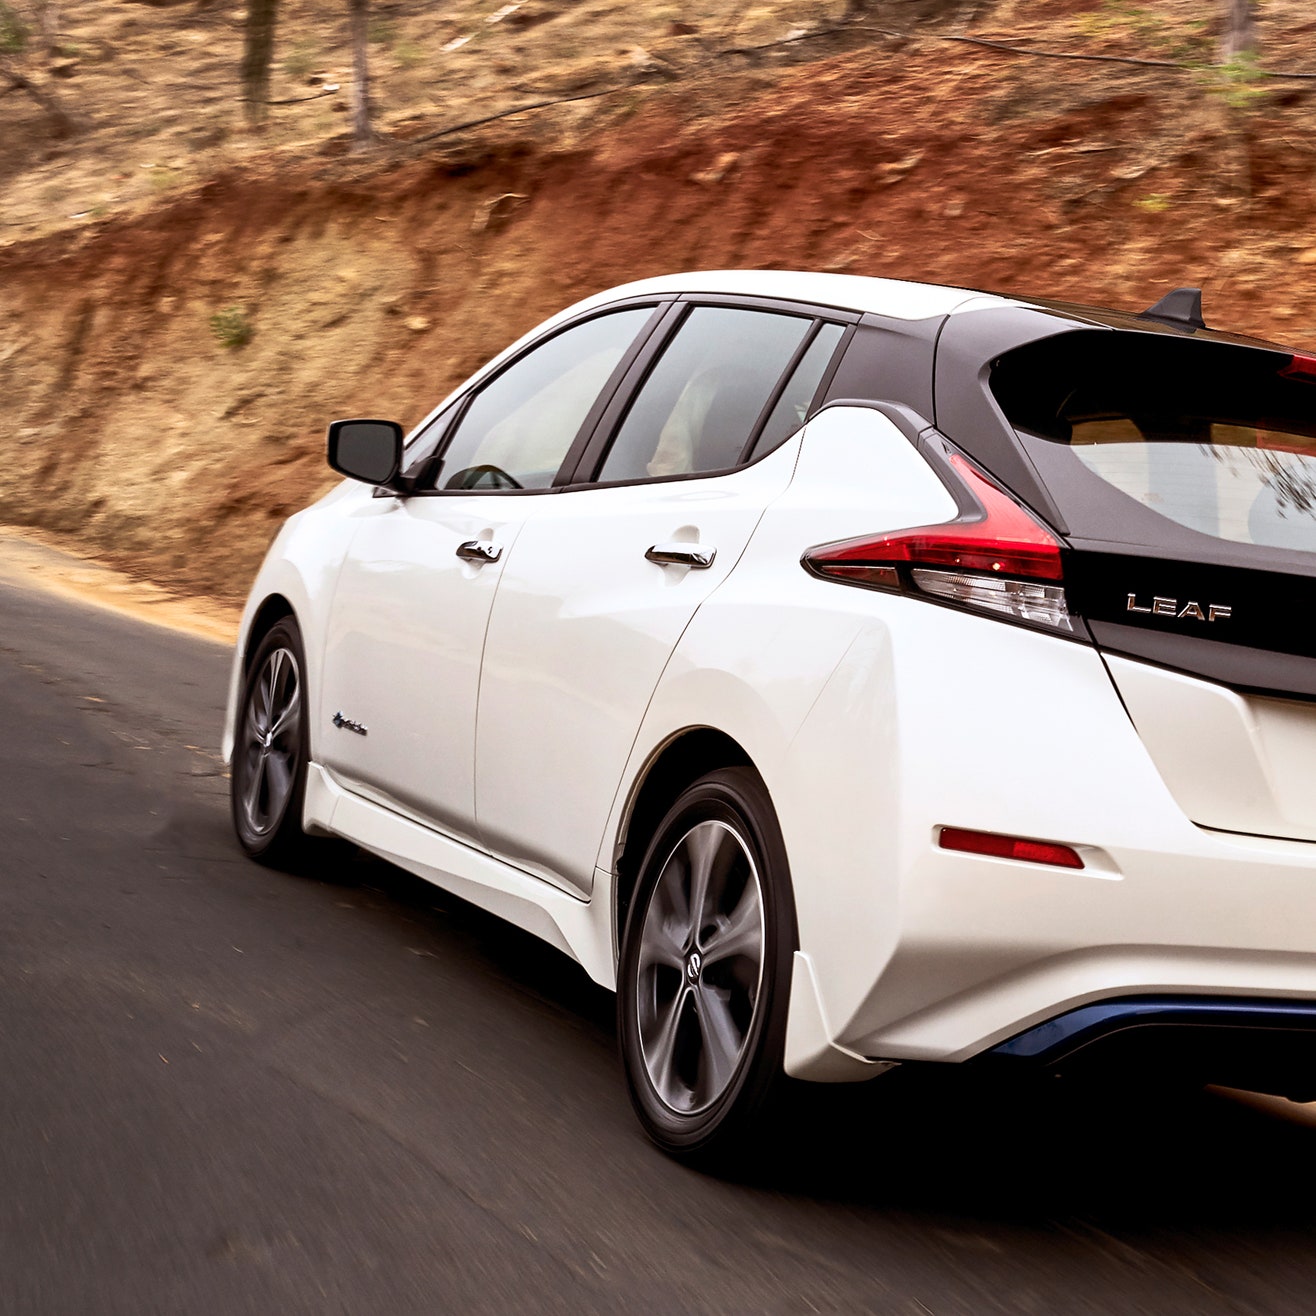 Nissan's 2018 Leaf Offers 150 Miles of Range for $30,000 | WIRED